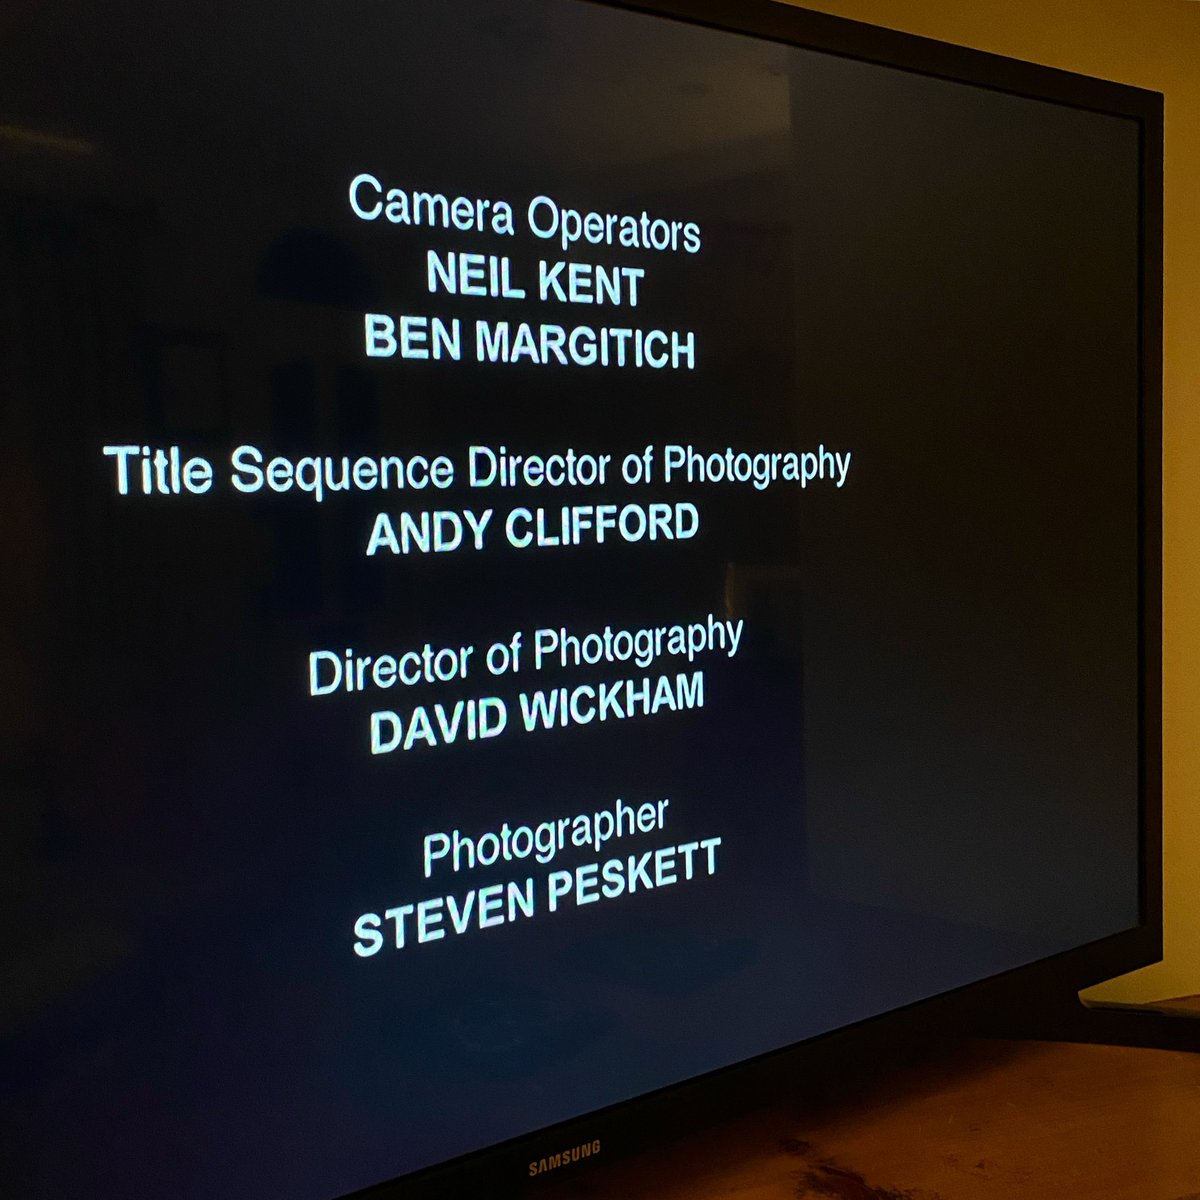 Always nice to see my name on TV. Being credited on a show means the world. #unitstills #credit #beingcredited #workingintv